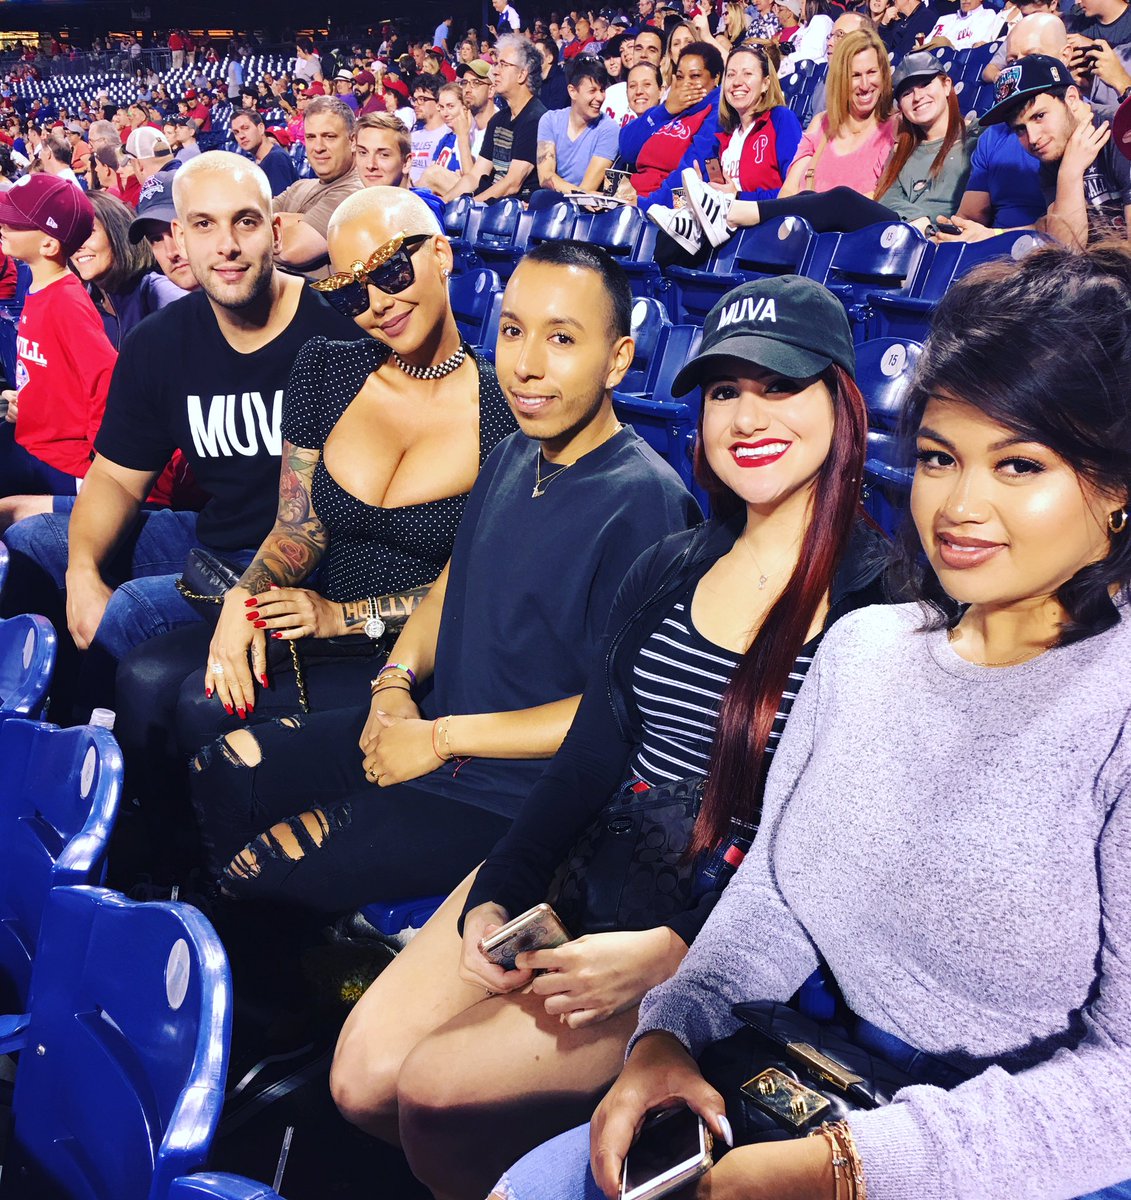 Thanks for having us @Phillies! ???????????????? Lol at the photobombs #SouthPhillyGirl https://t.co/277jkYGA1w